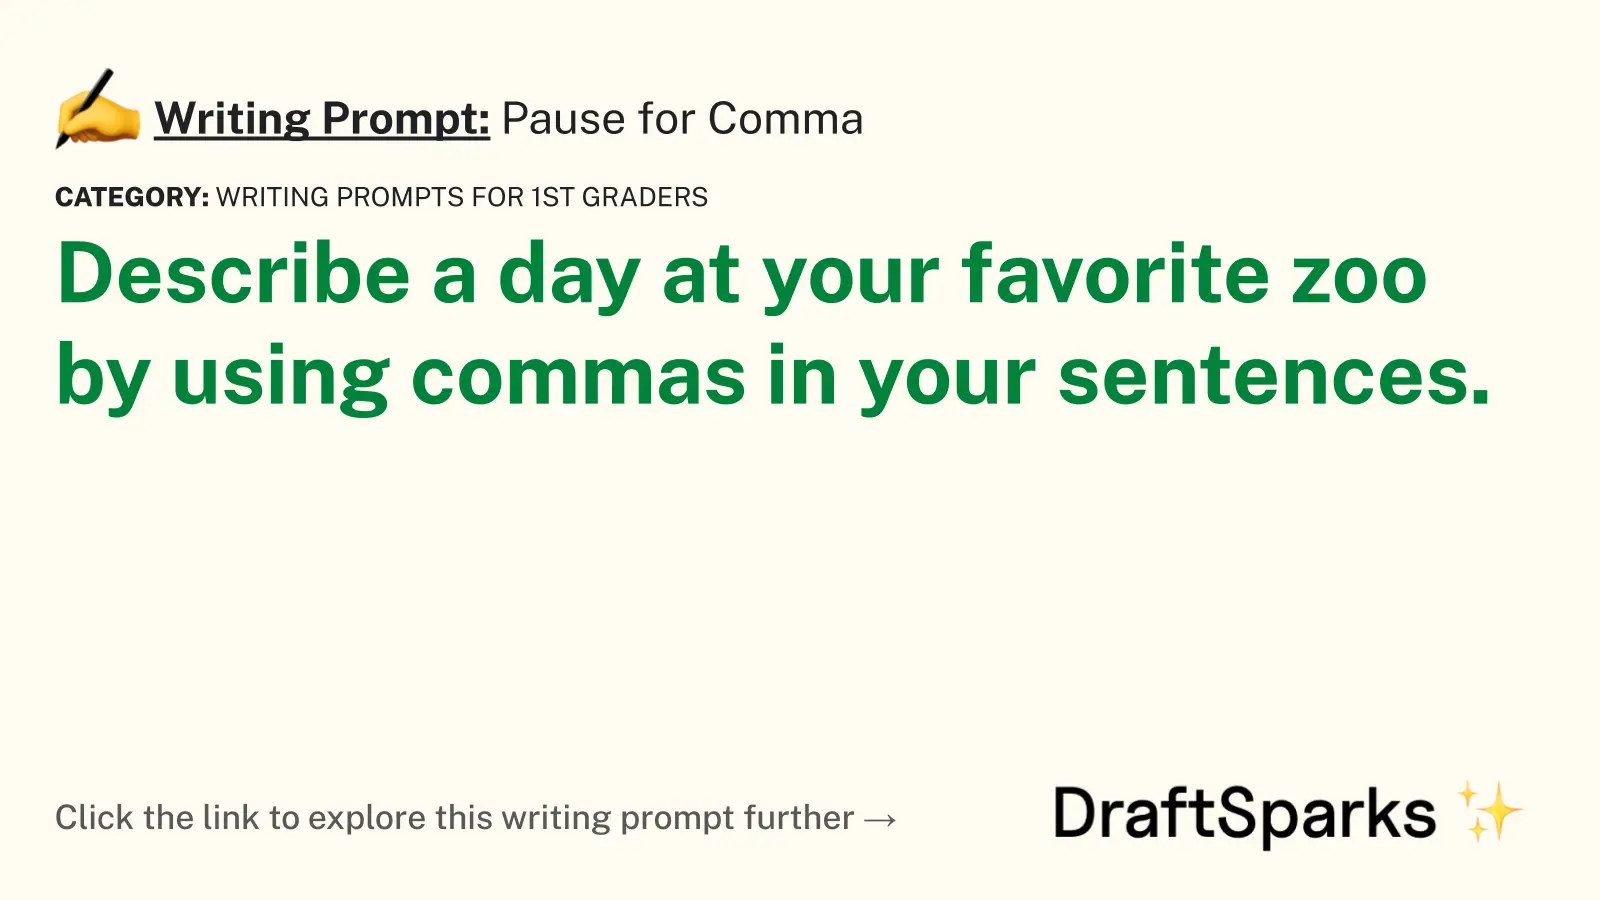 Pause for Comma